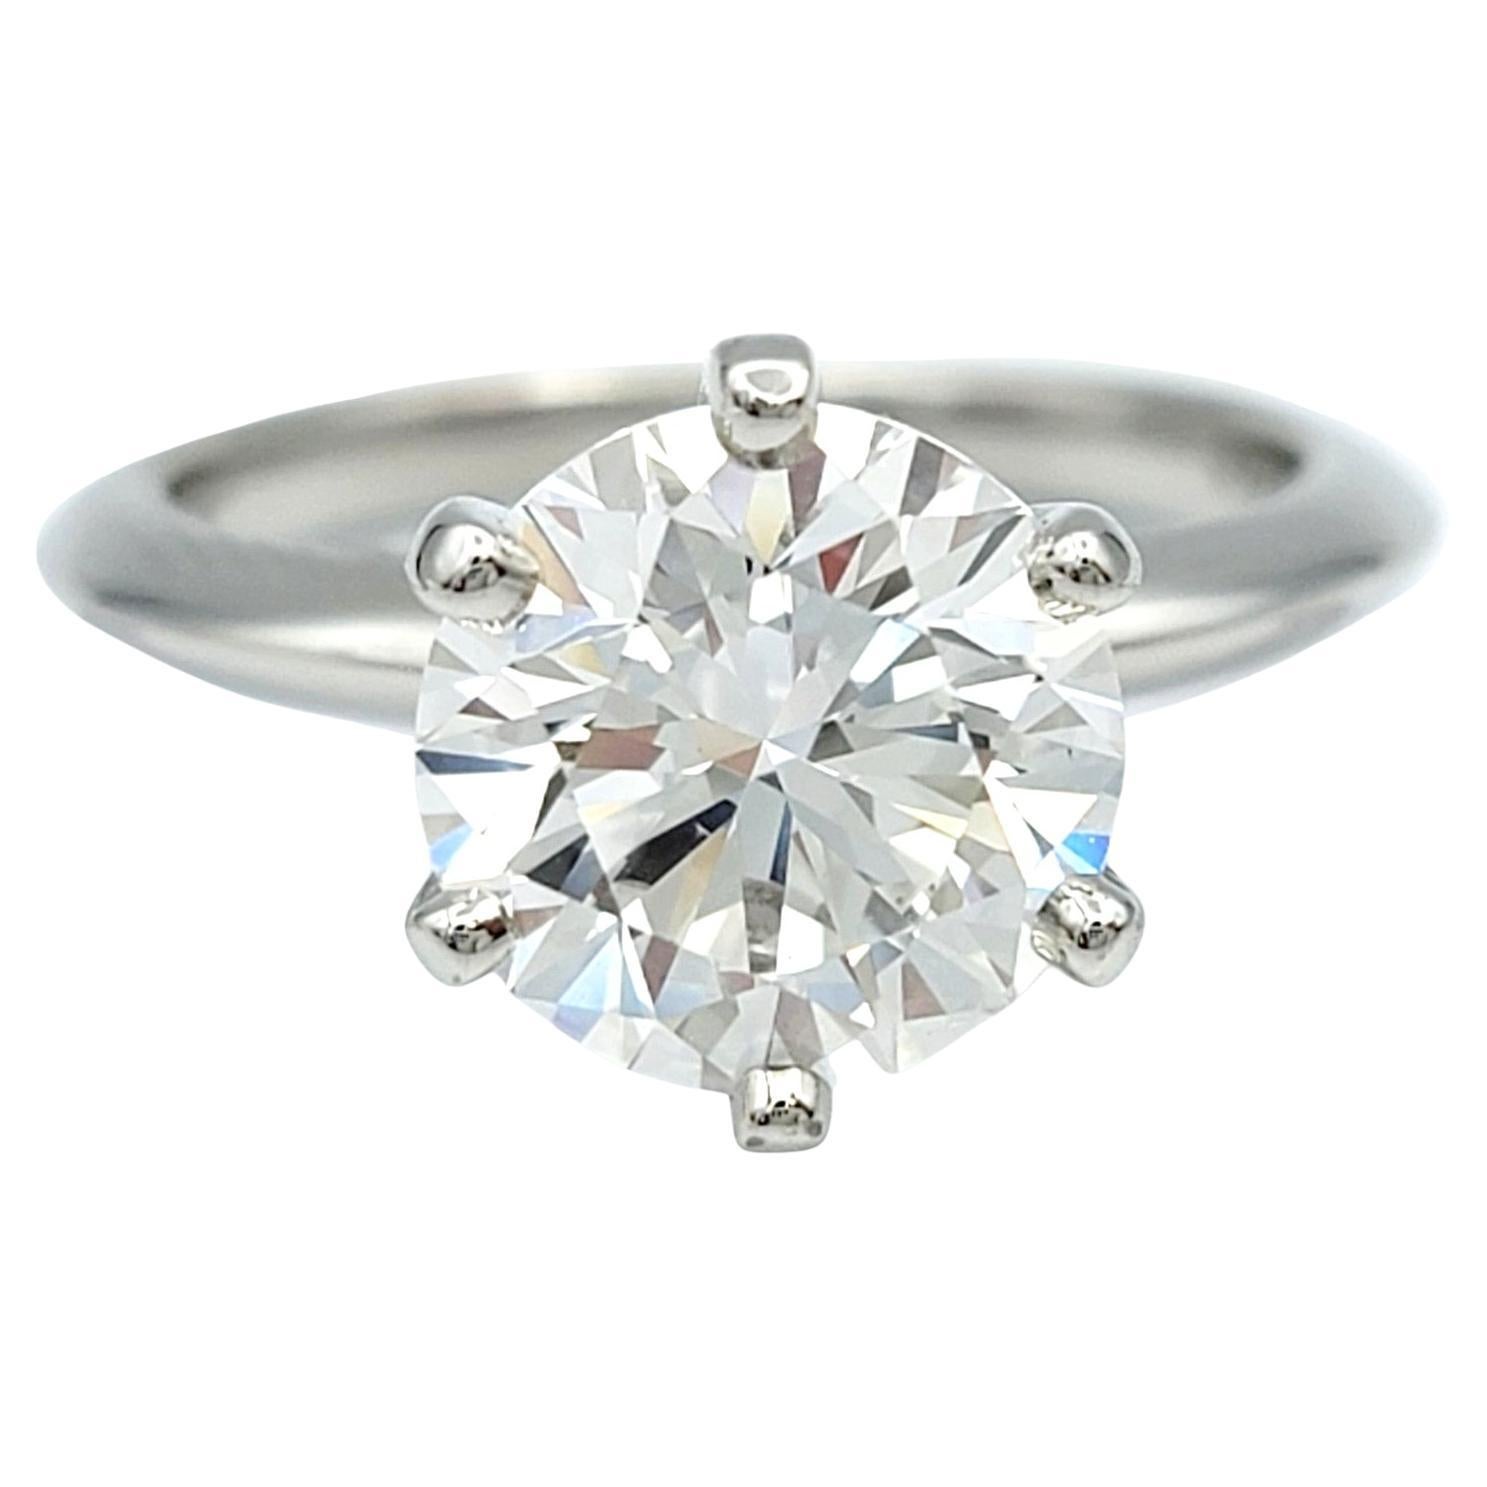 Tiffany & Co. 2.29 Carat Round Diamond Solitaire 6 Prong Engagement Ring, F/VS1  For Sale